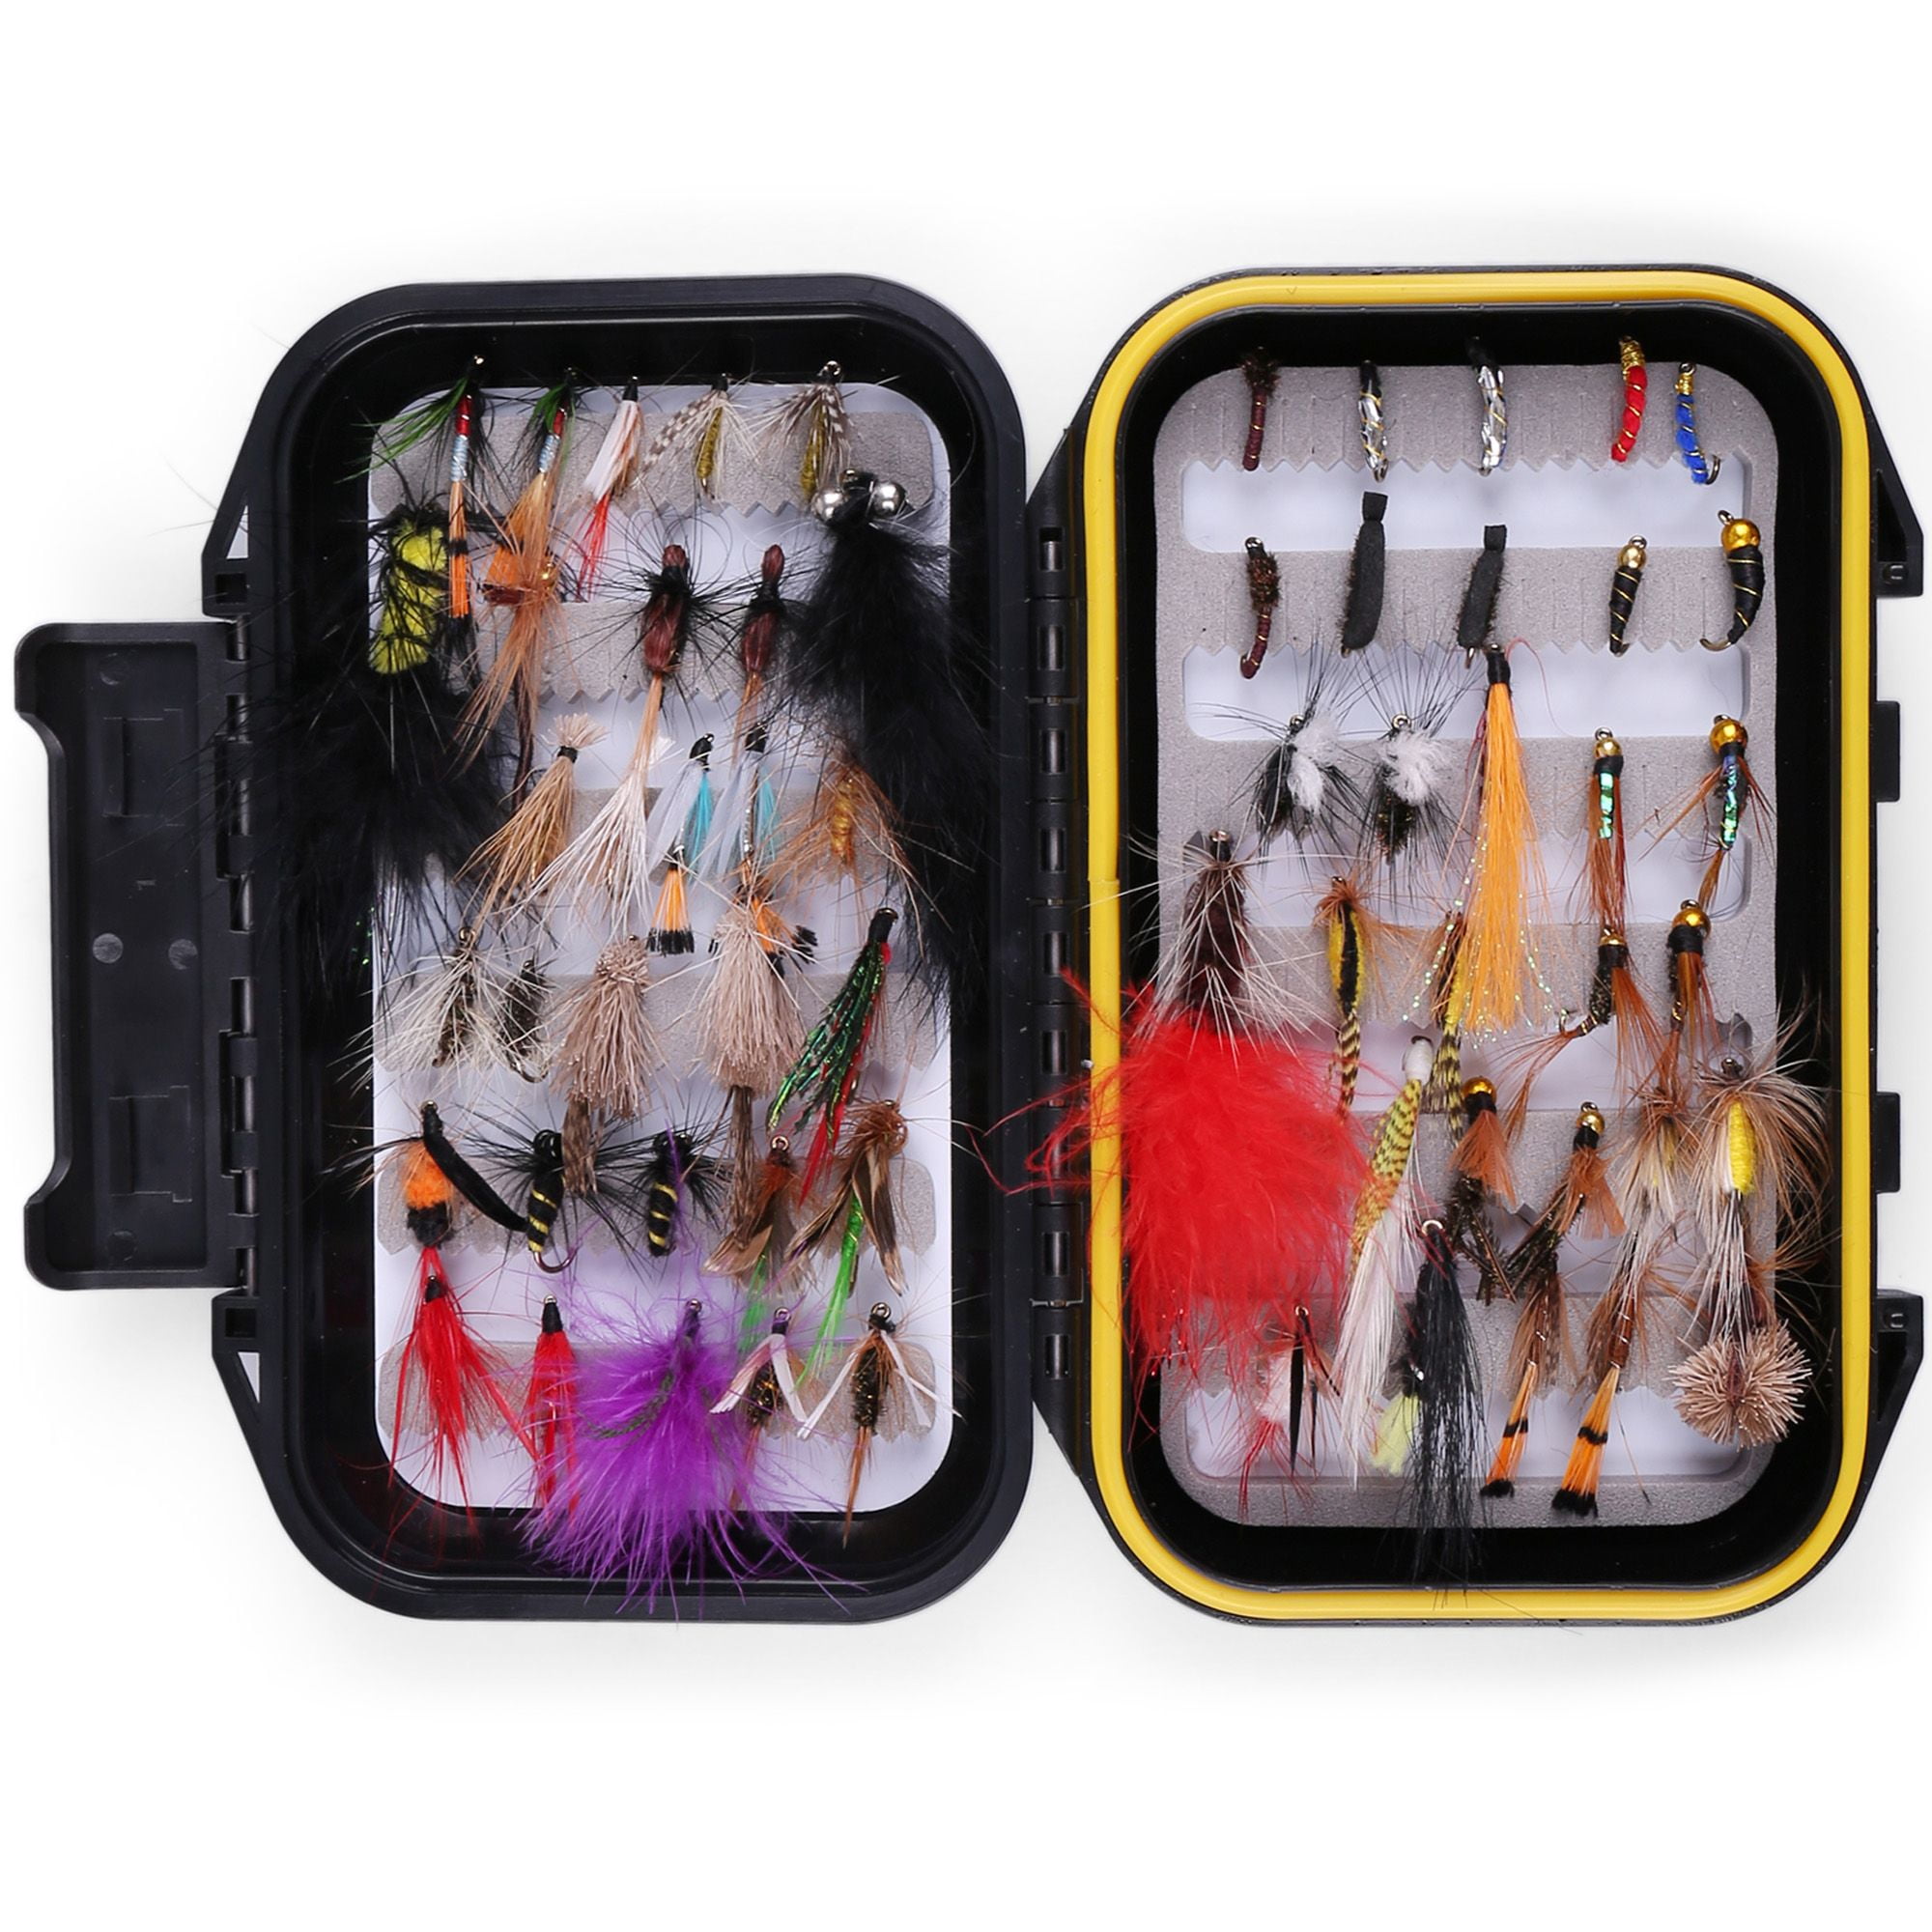 184pcs/box Wet Dry Nymph Fly Fishing Lure Set Fake Flies for Trout